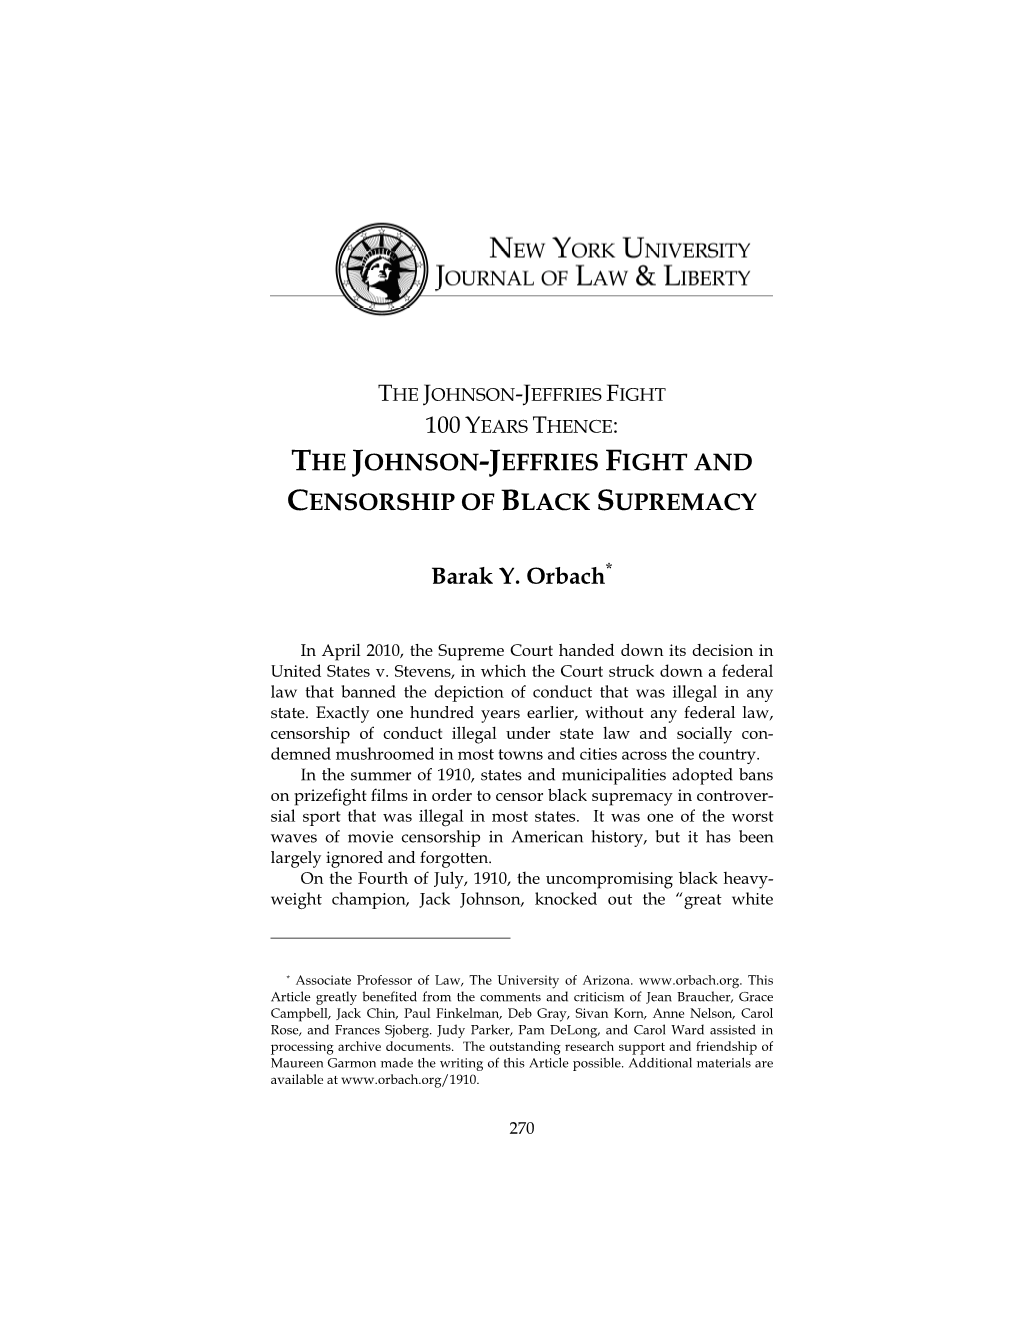 The Johnson-Jeffries Fight and Censorship of Black Supremacy